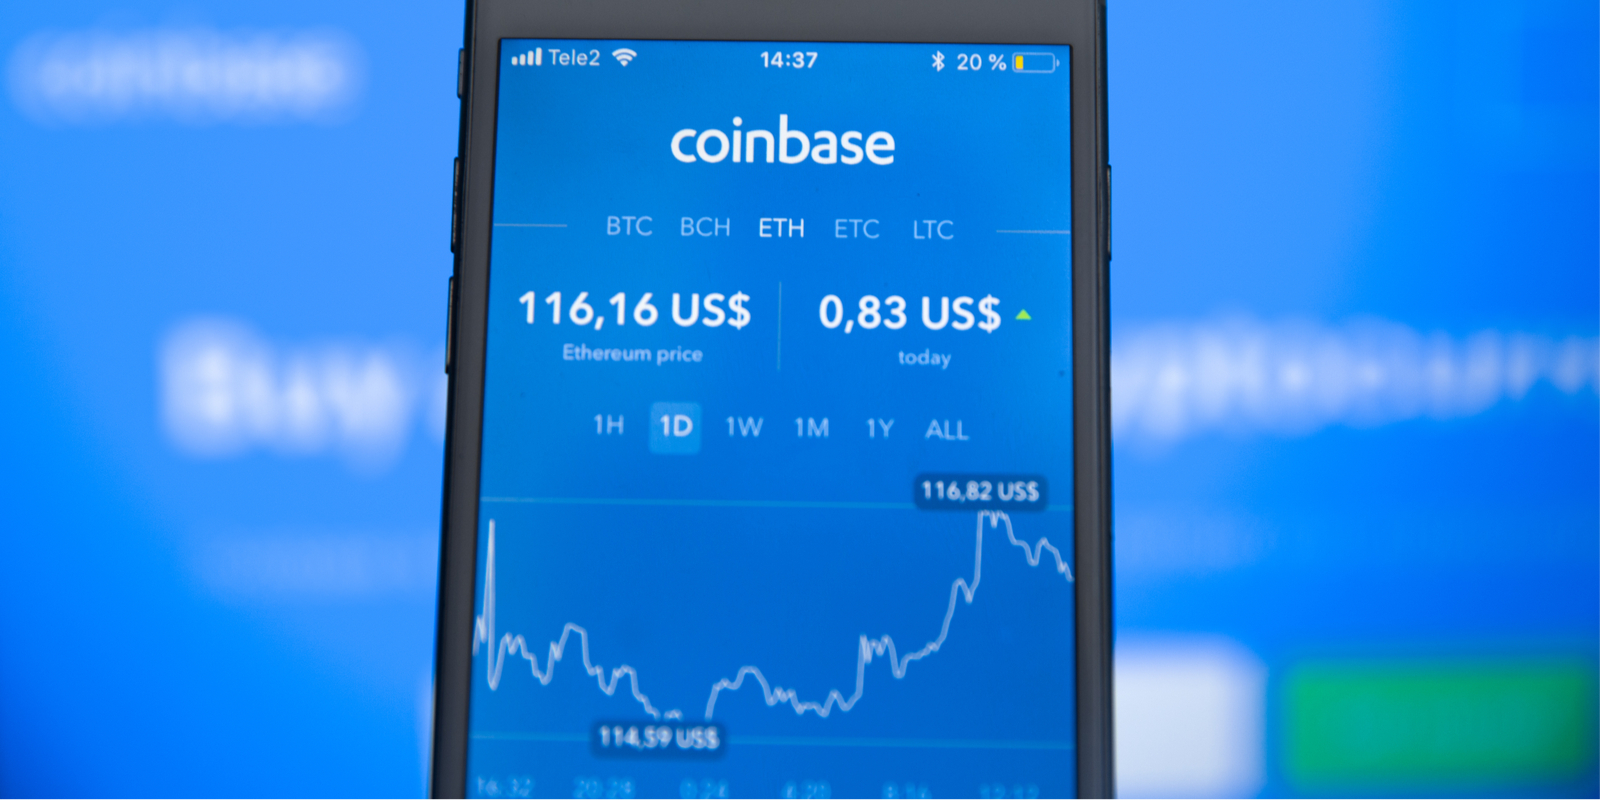 coinbase available in which countries